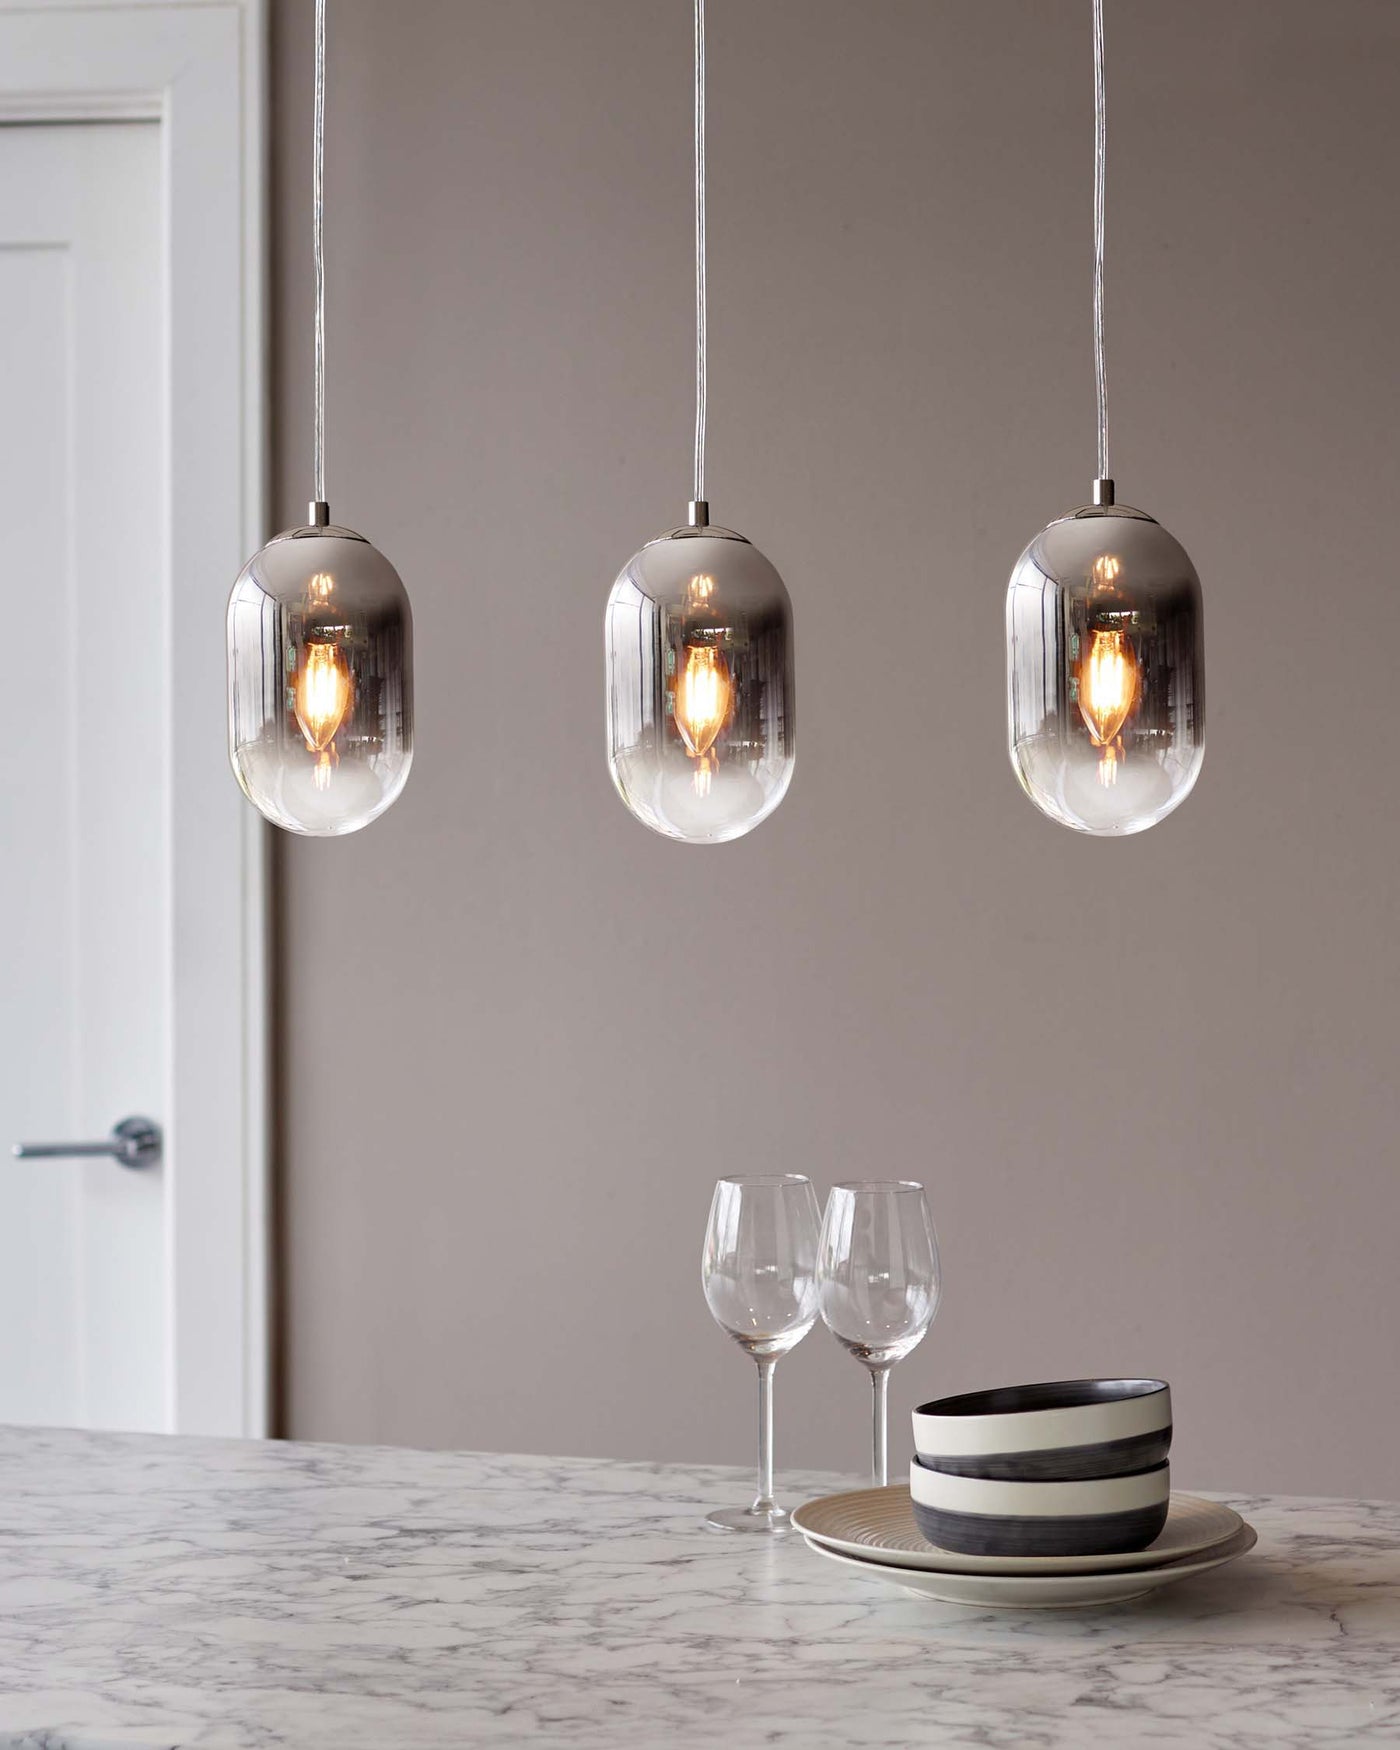 Three modern pendant lights with a sleek glass design hanging above a marble countertop displaying two wine glasses and a set of stylish striped ceramic bowls and plates.